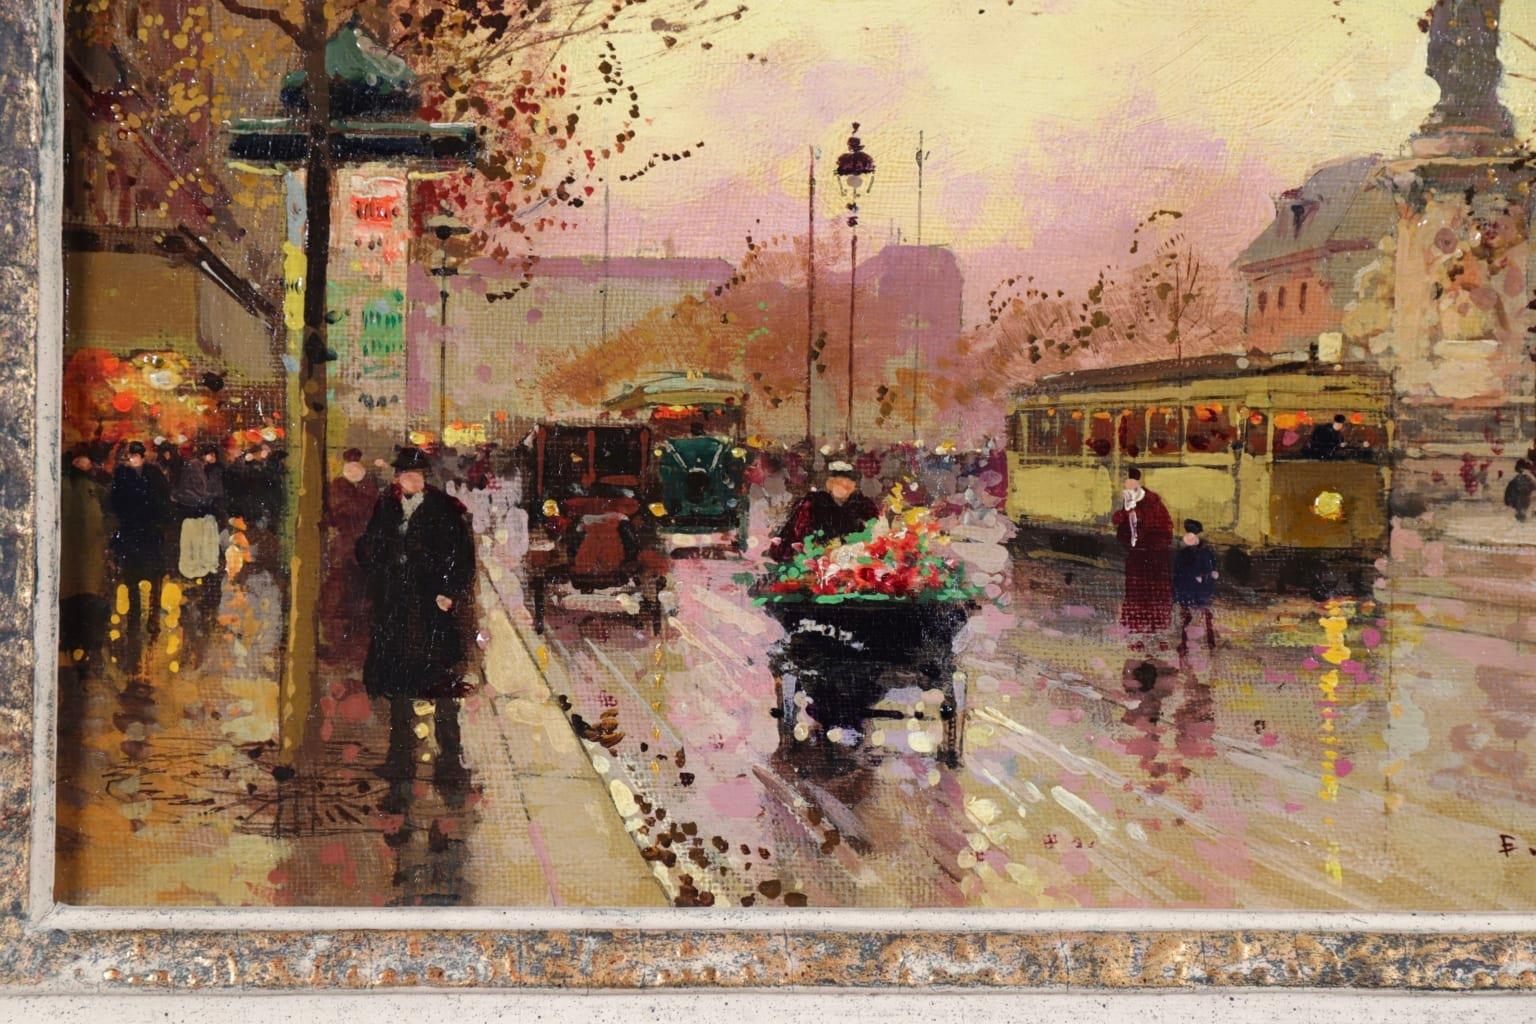 A beautiful oil on canvas circa 1910 by sought after French Impressionist painter Edouard Leon Cortes depicting a street scene at the Place de la Republique in Paris. A wonderful subject showing trams and cars on the street - their lights reflecting